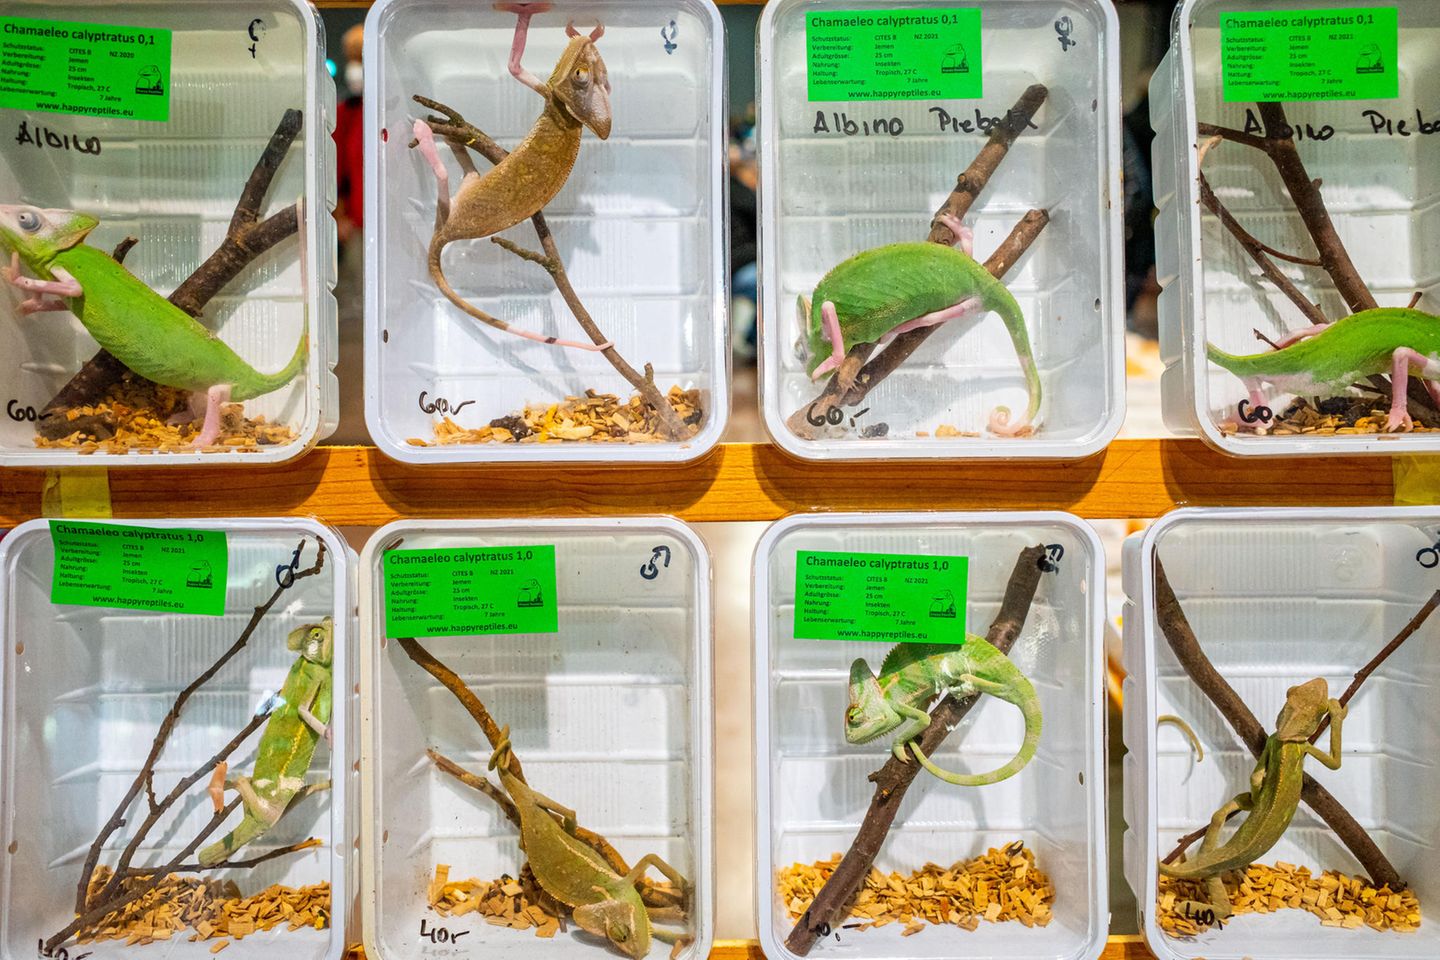 Image Name: Exotic appetite 1  Photographer Name: Federico Borella  Year: 2022  Image Description: <p>Chameleons in plastic boxes, on display during an exotic animals trade fair in Vicenza, Italy, in November 2021.</p>  Series Name: Exotic Appetite: Inside the Italian Exotic Animal Trade  Series Description: It's common to think that ’wet markets’ only exist in Asian countries, but in Italy there are also fairs at which thousands of exotic animals are displayed and sold, and huge profits are made. At these fairs, exotic animals are considered collectibles. They’re often stressed, kept in plastic trays the same size as the animals they contain, and anyone can touch them. Among the stands it's not uncommon to find animals who are solitary by nature, forced to live in groups, and animals with a strong social nature isolated in plastic boxes. There is also the question of potential risks to human health.